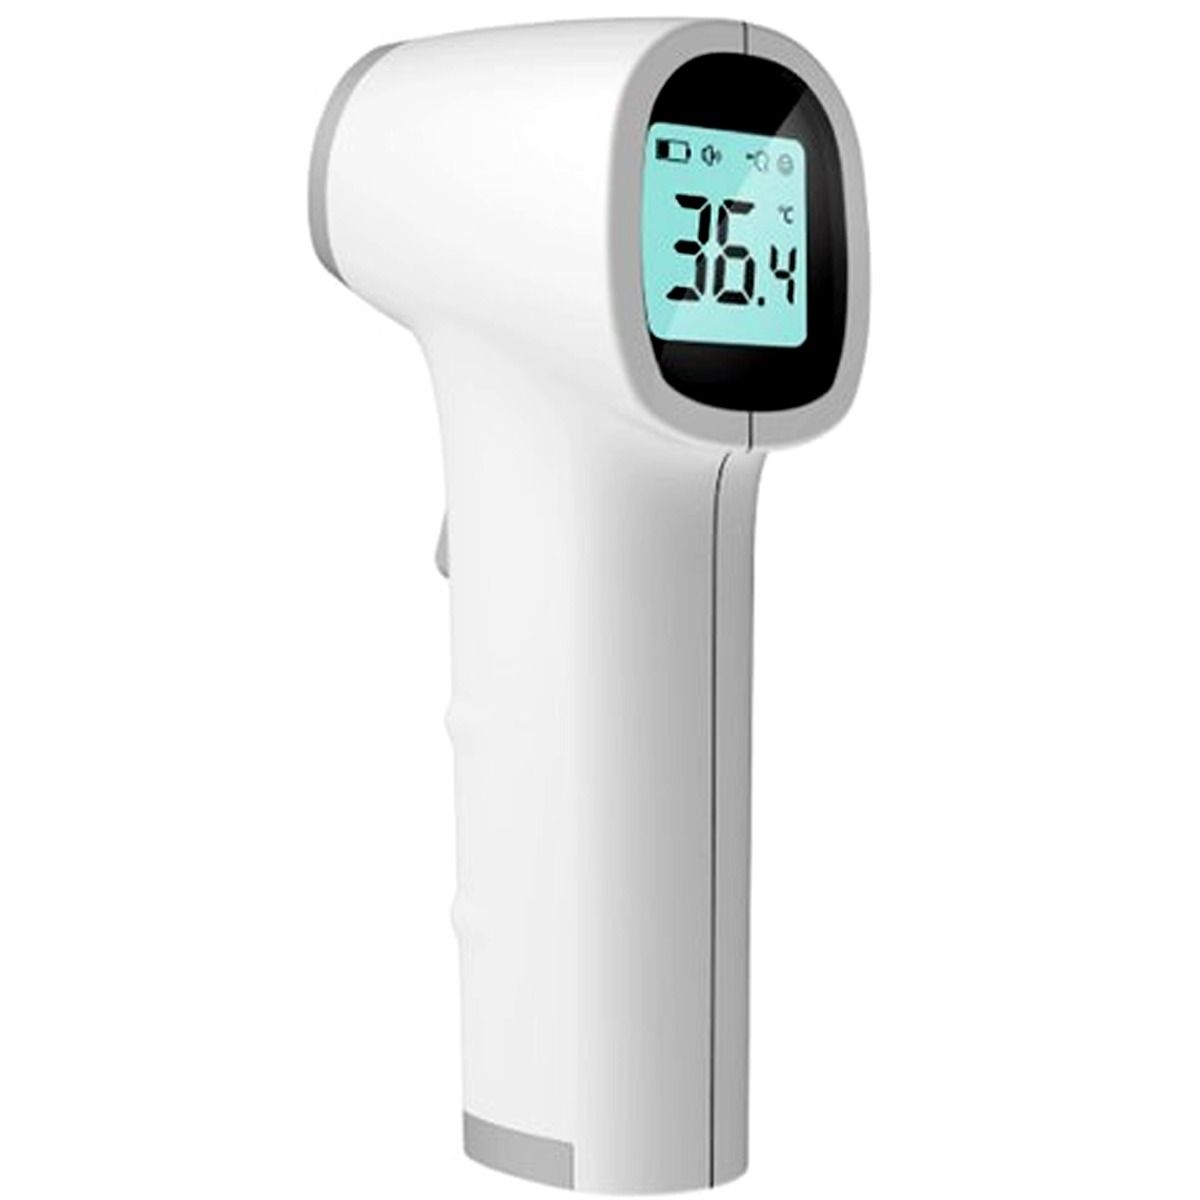 Buy Contec TP500 Infrared Thermometer Online